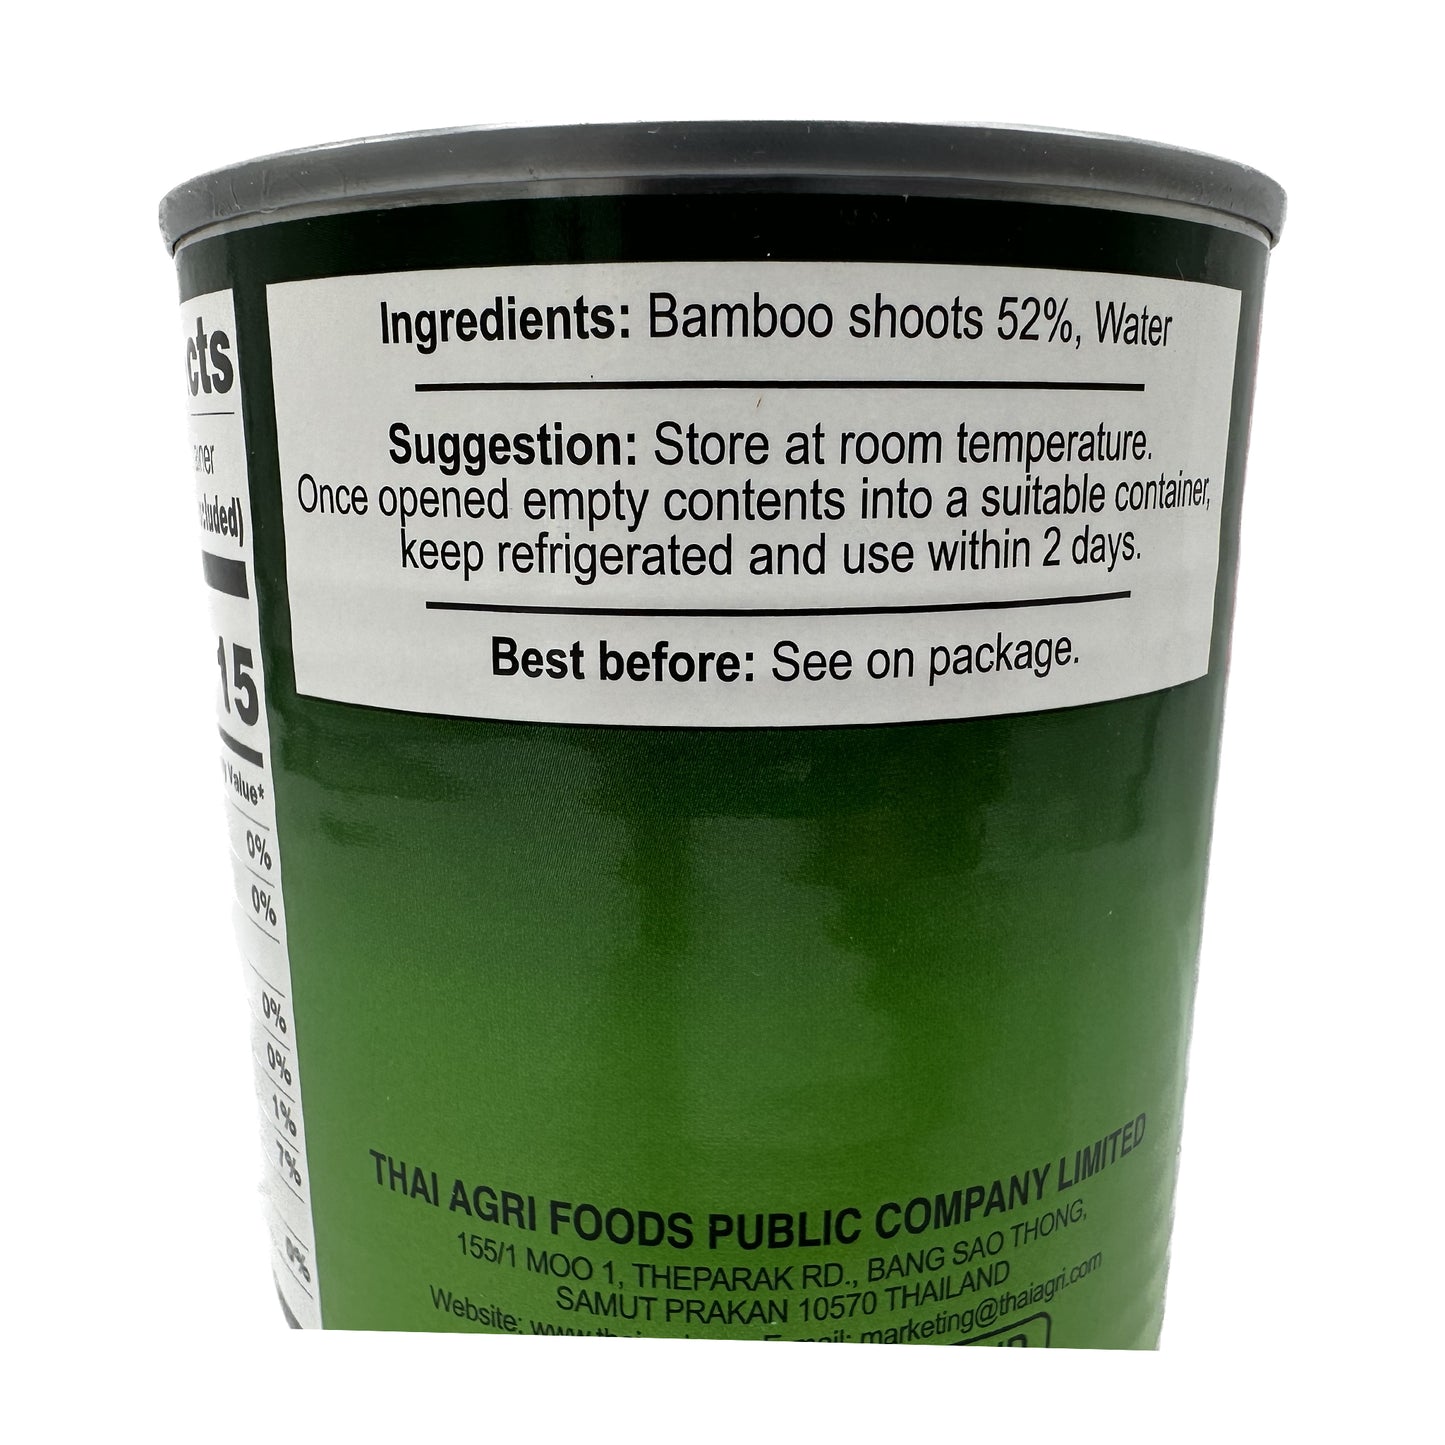 Aroy-D Band Bamboo Shoots (Slices) in Water -19 oz